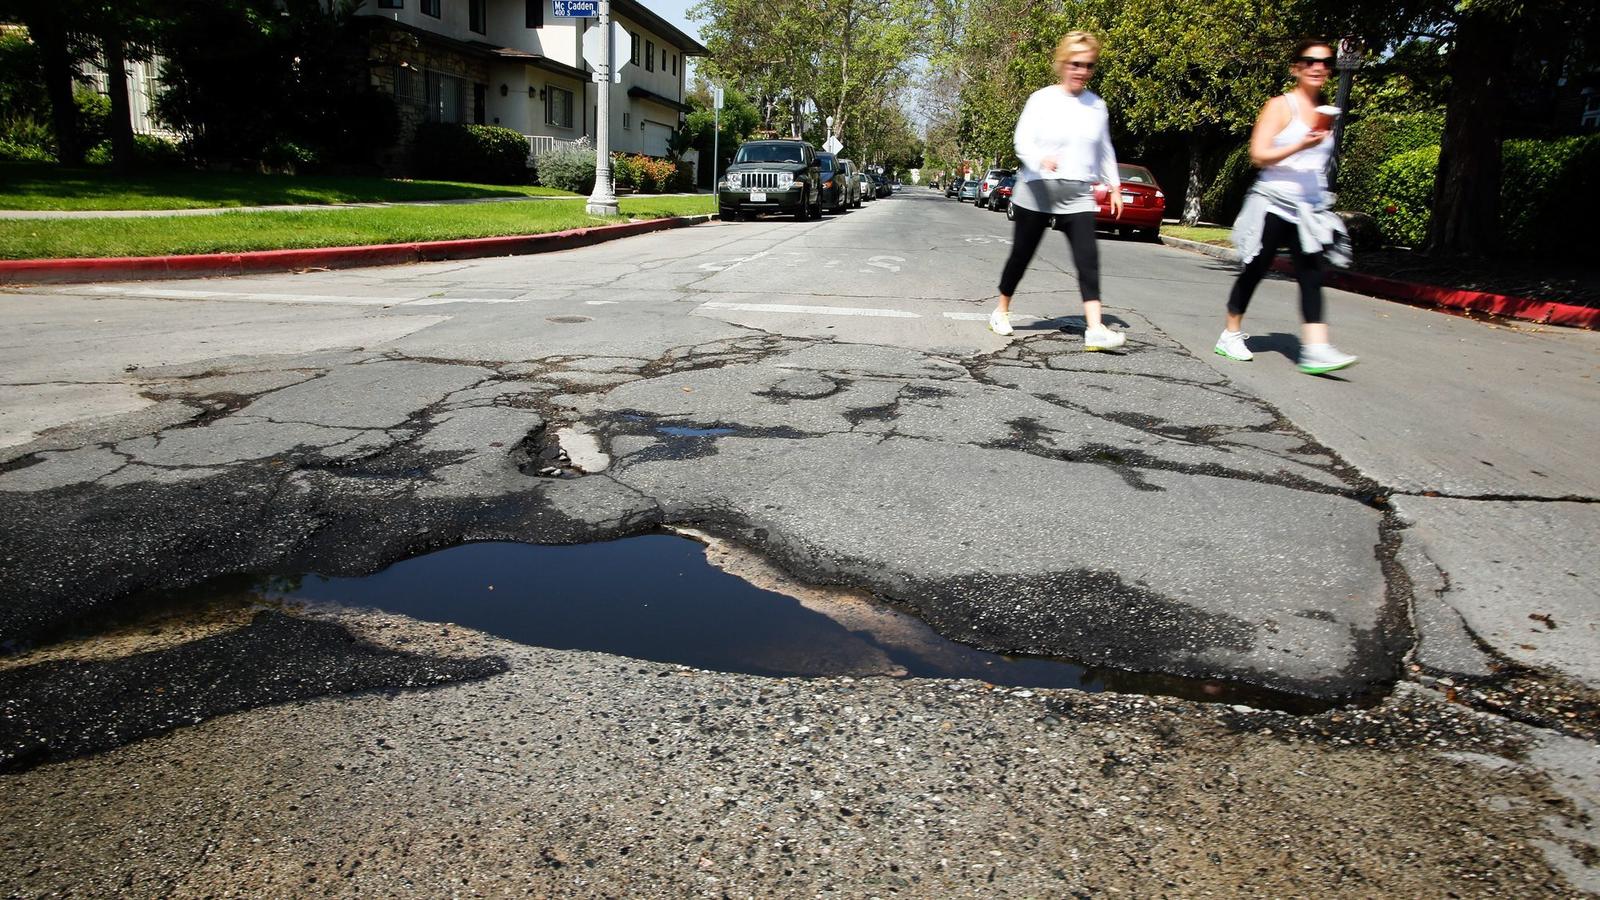 Image of some of the dangerous road conditions in LA